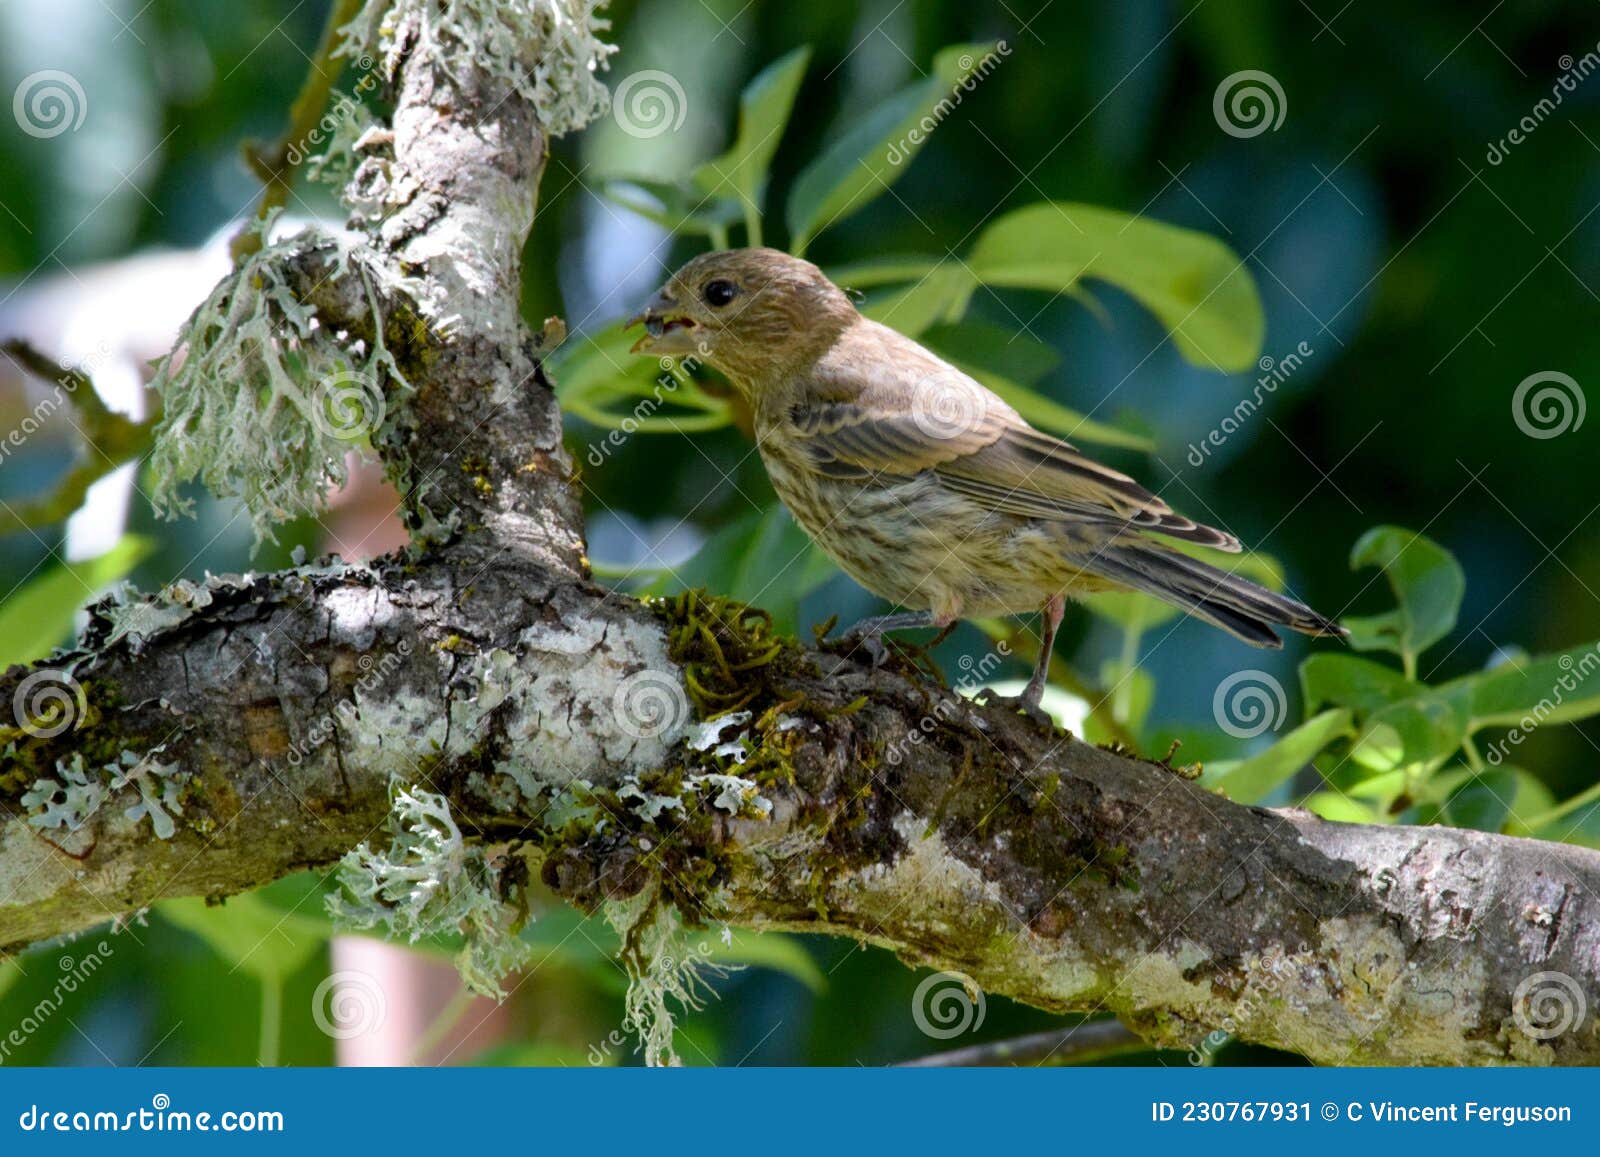 brown striped house finch on branch 04